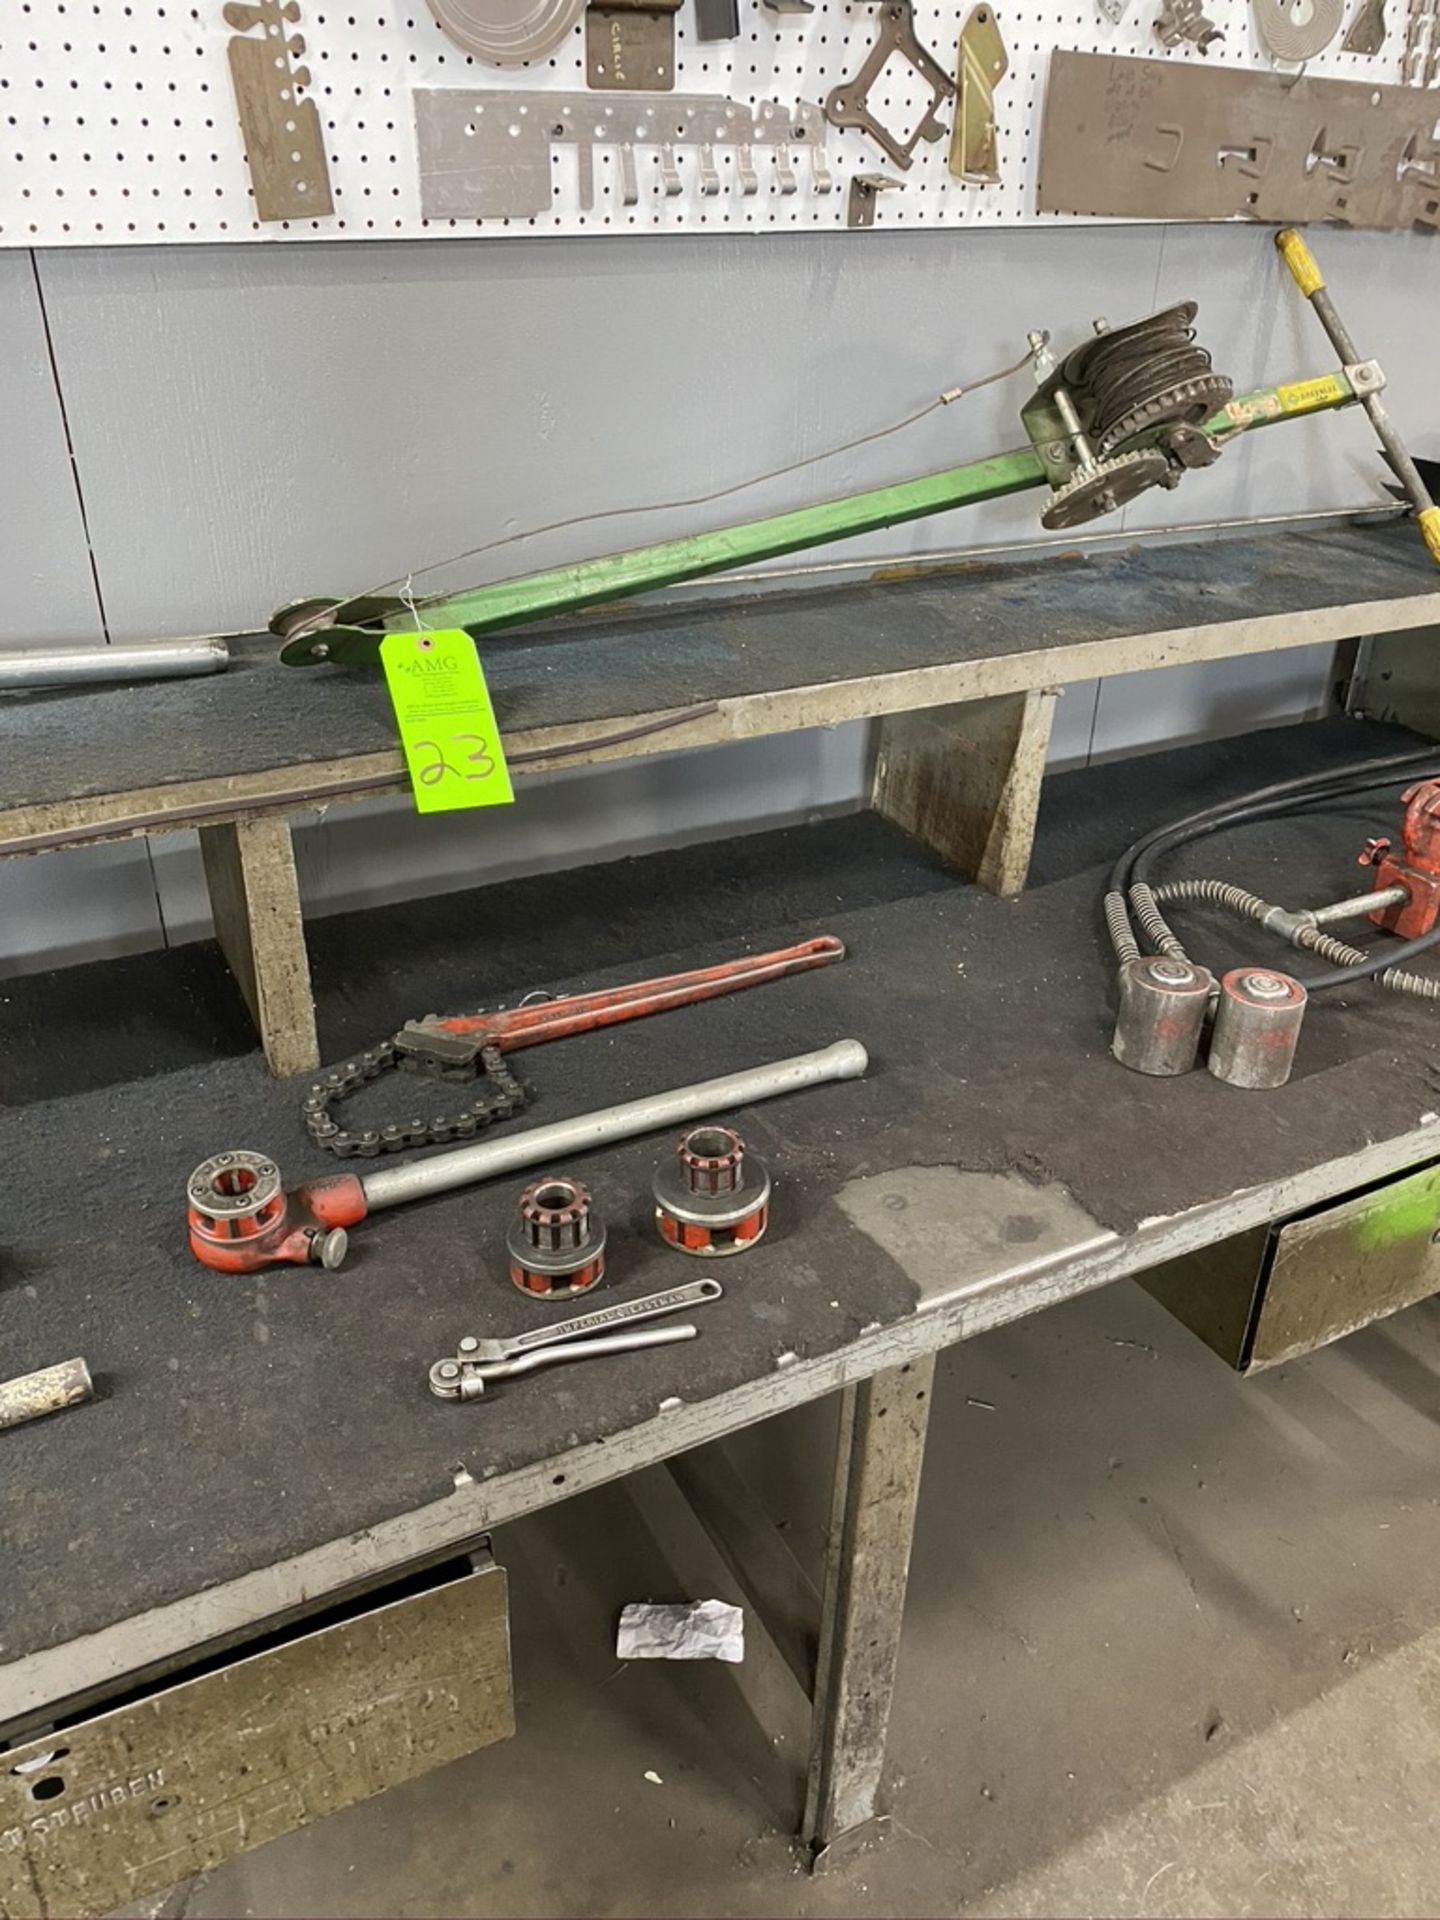 Lot of Barrel pump, hand benders, rigid tap set, Rigid chain wrench,Greenlee fish tape, - Image 2 of 2